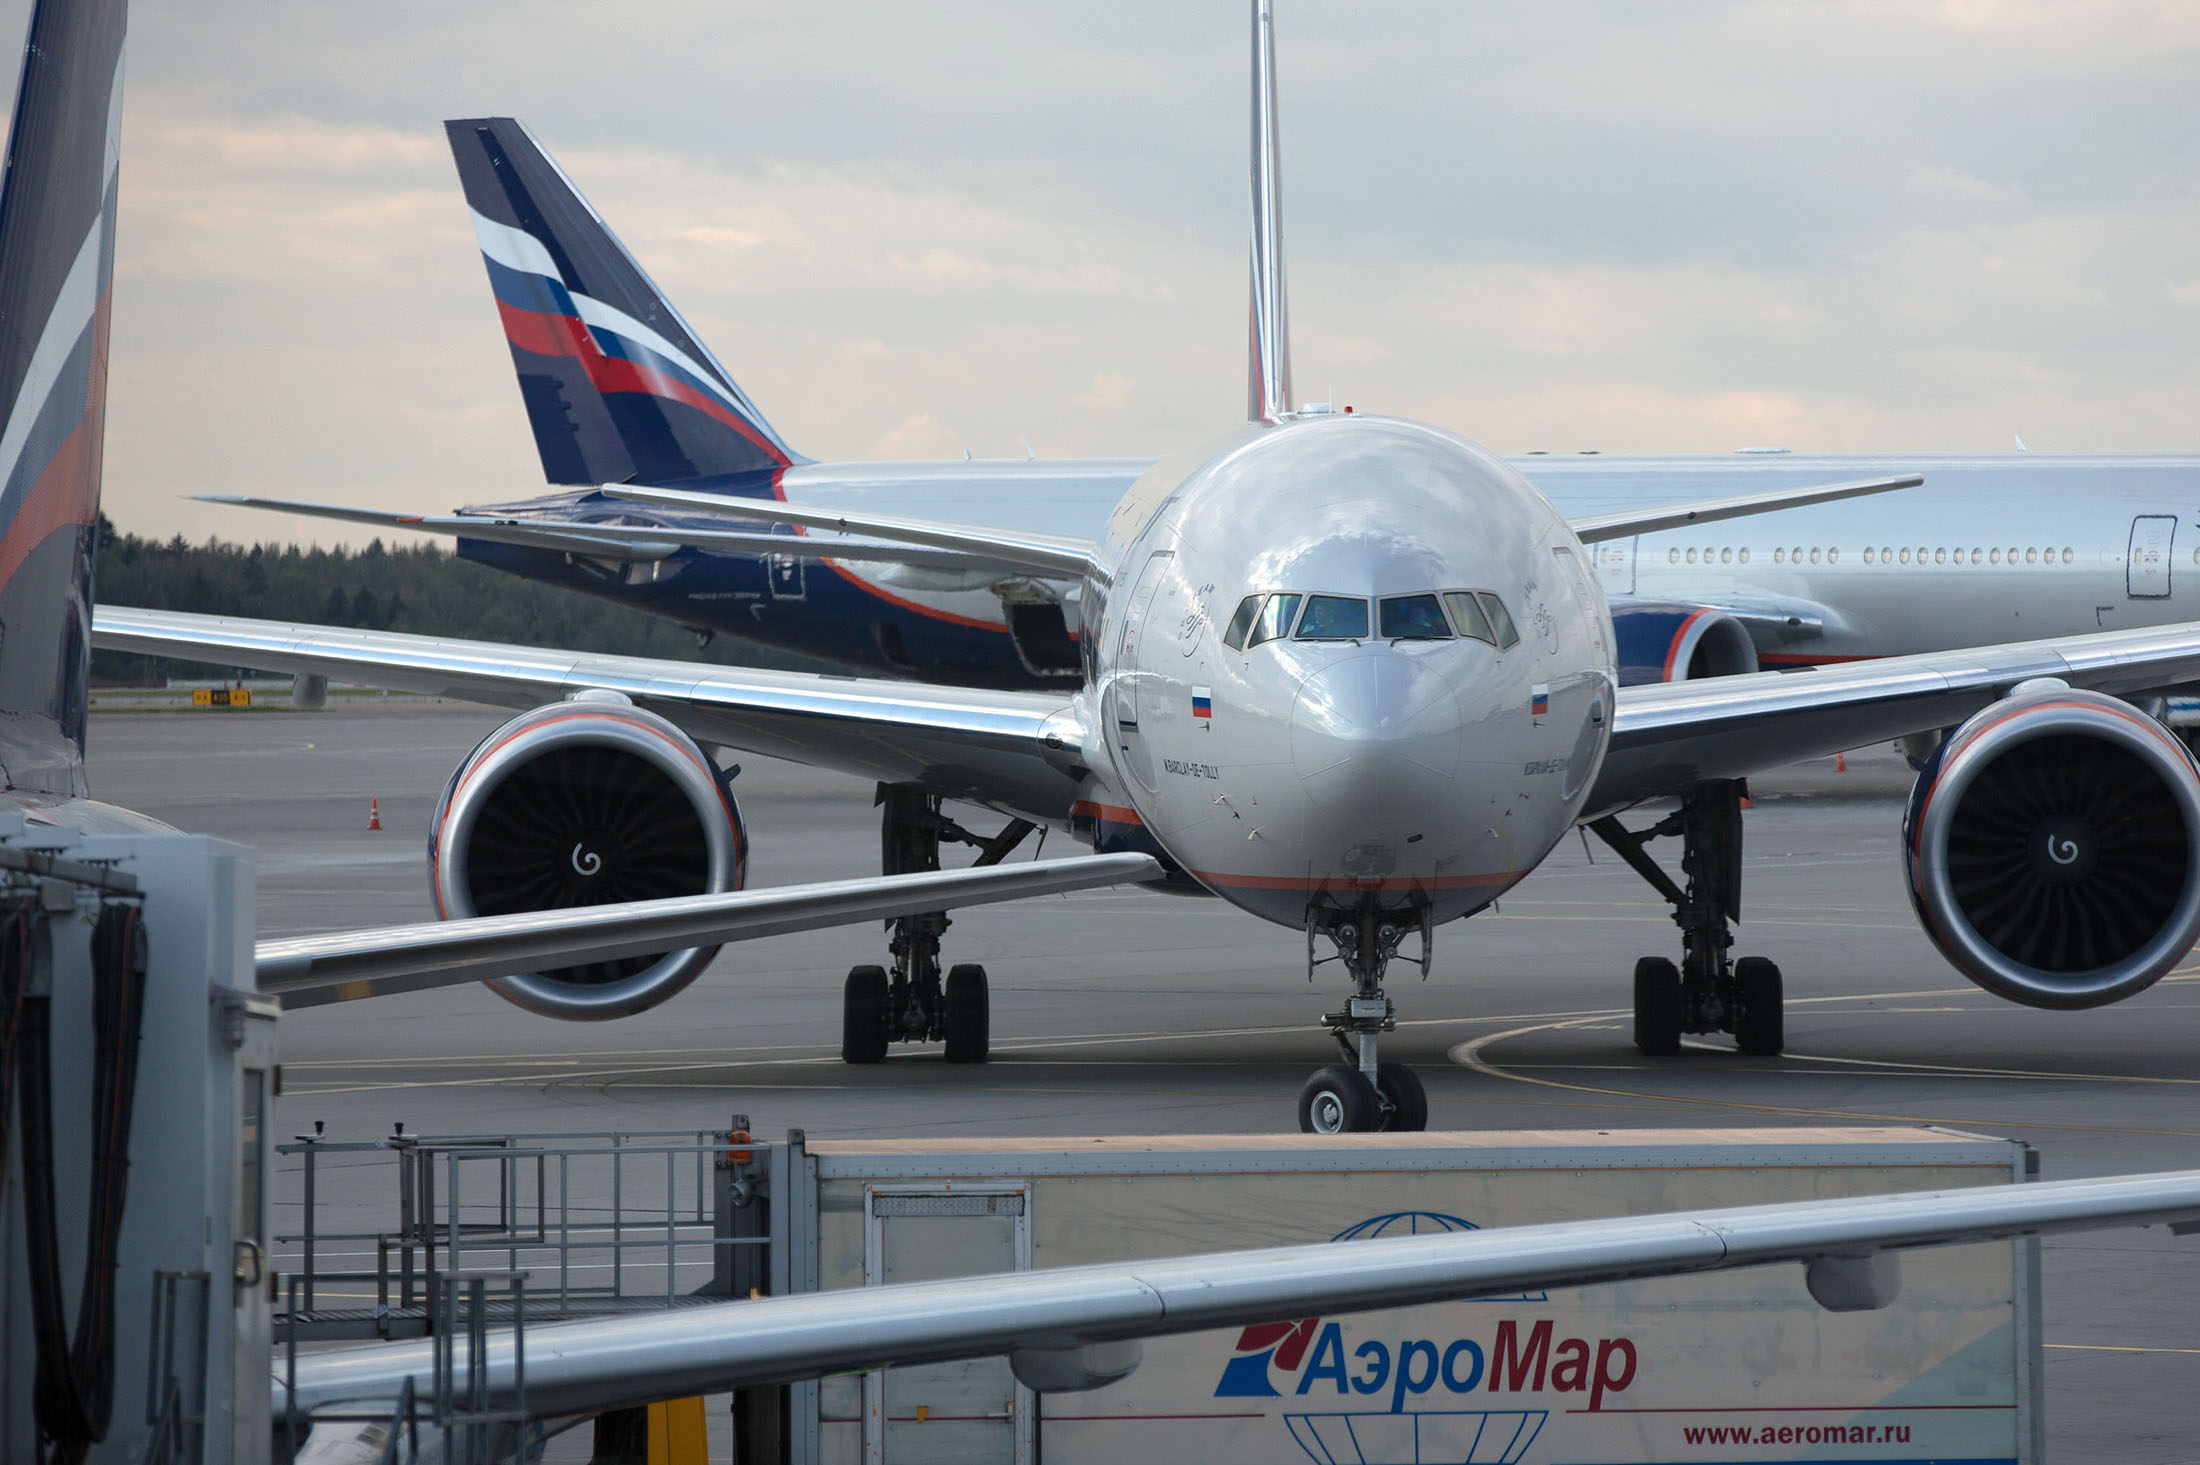 An OAO Aeroflot operated Boeing 777-300ER passenger jet, named M. Barclay de Tolly, taxis at Sheremetyevo airport in Moscow, Russia, on Thursday, Sept. 4, 2014. Russian flag carrier Aeroflot said it will revive plans to build a low-cost arm after discount unit Dobrolet was grounded by European Union sanctions tied to the Ukraine crisis just two months after flights began.
